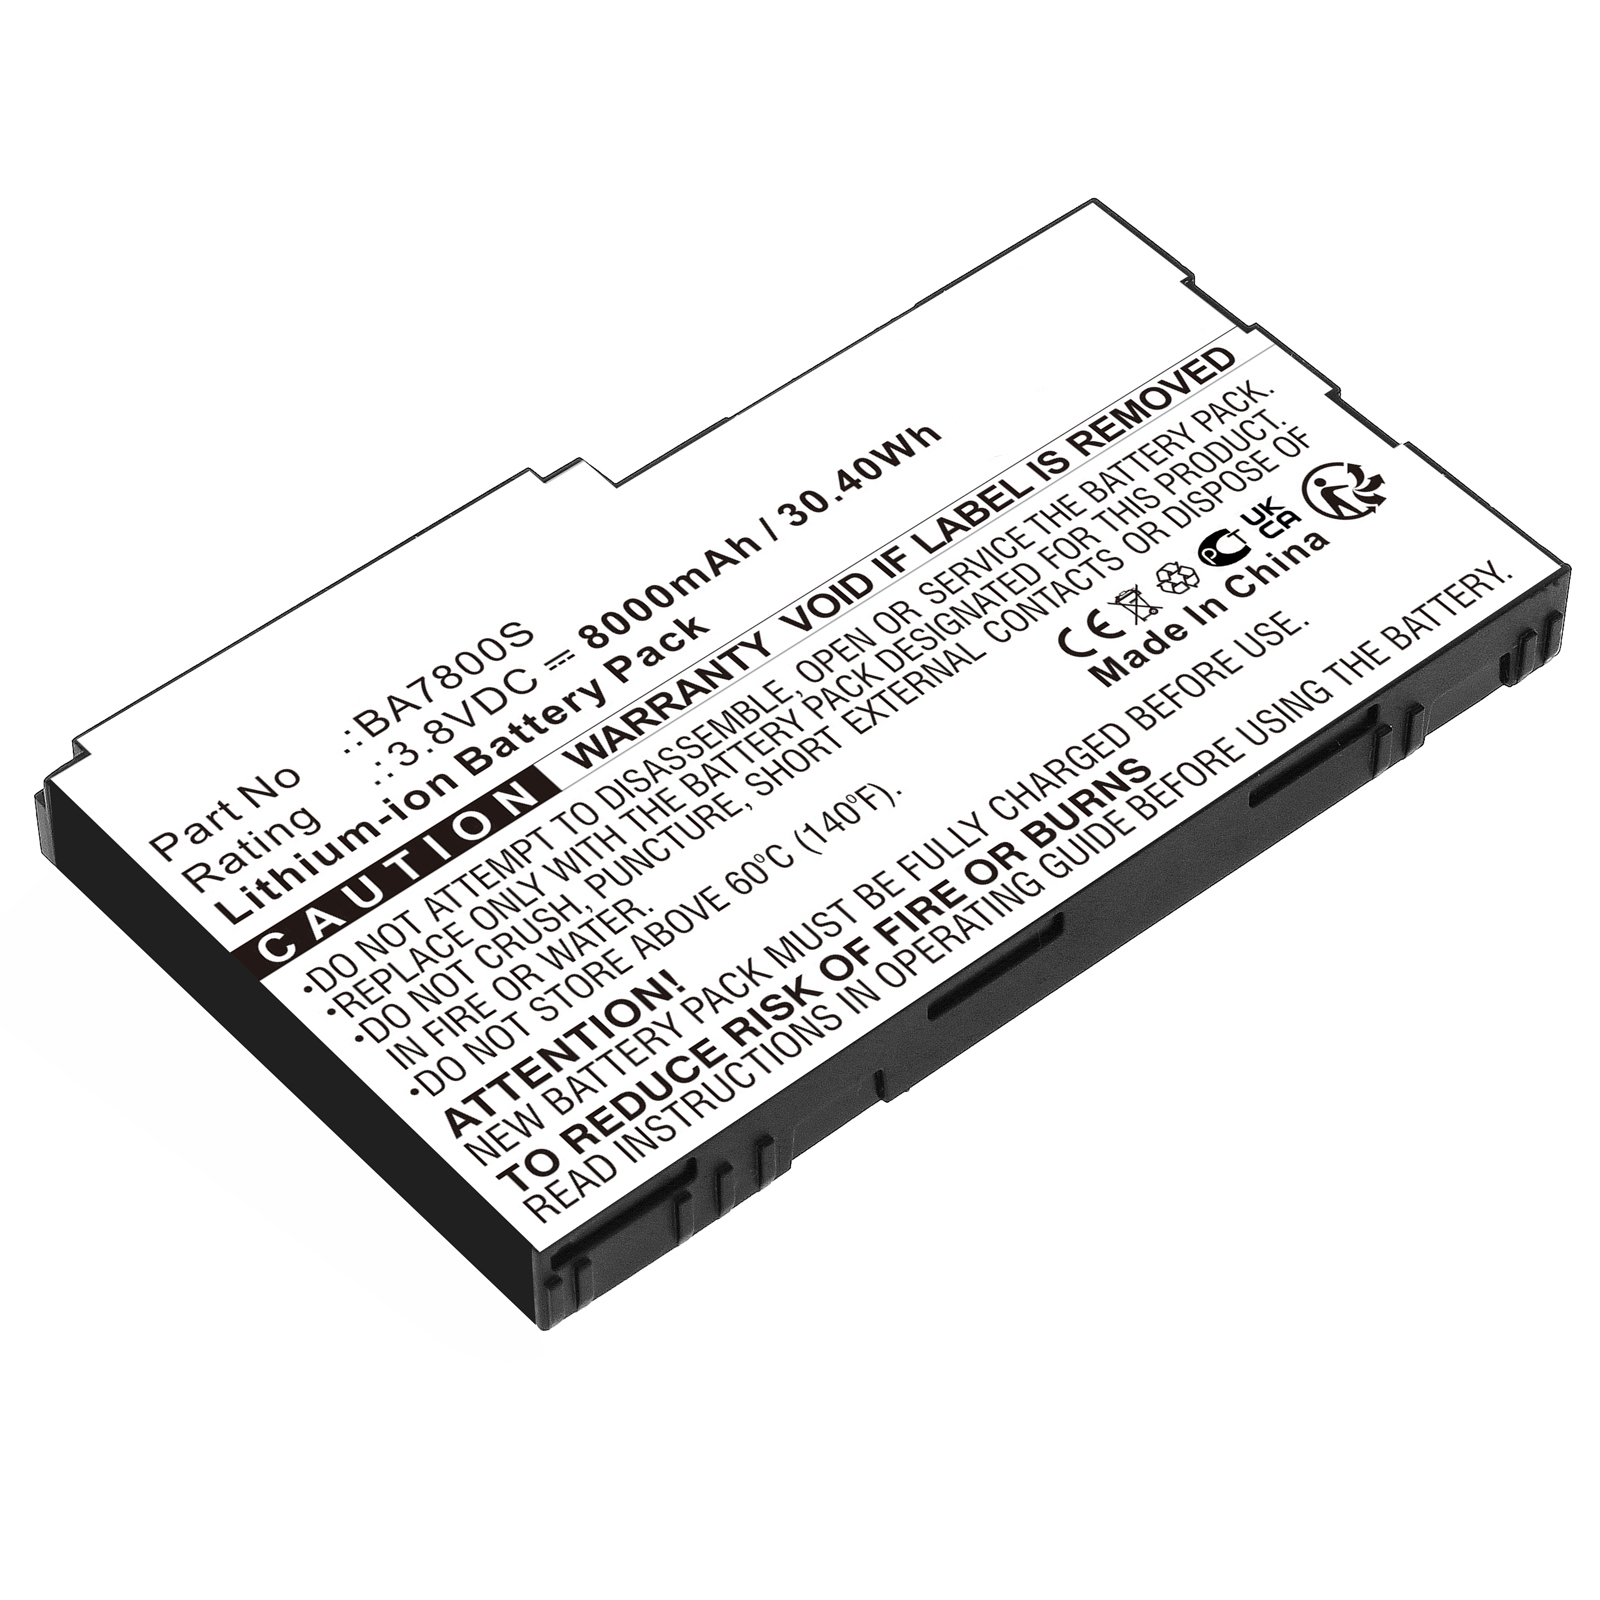 Synergy Digital Equipment Battery, Compatible with Spectra BA7800S Equipment Battery (Li-Ion, 3.8V, 8000mAh)